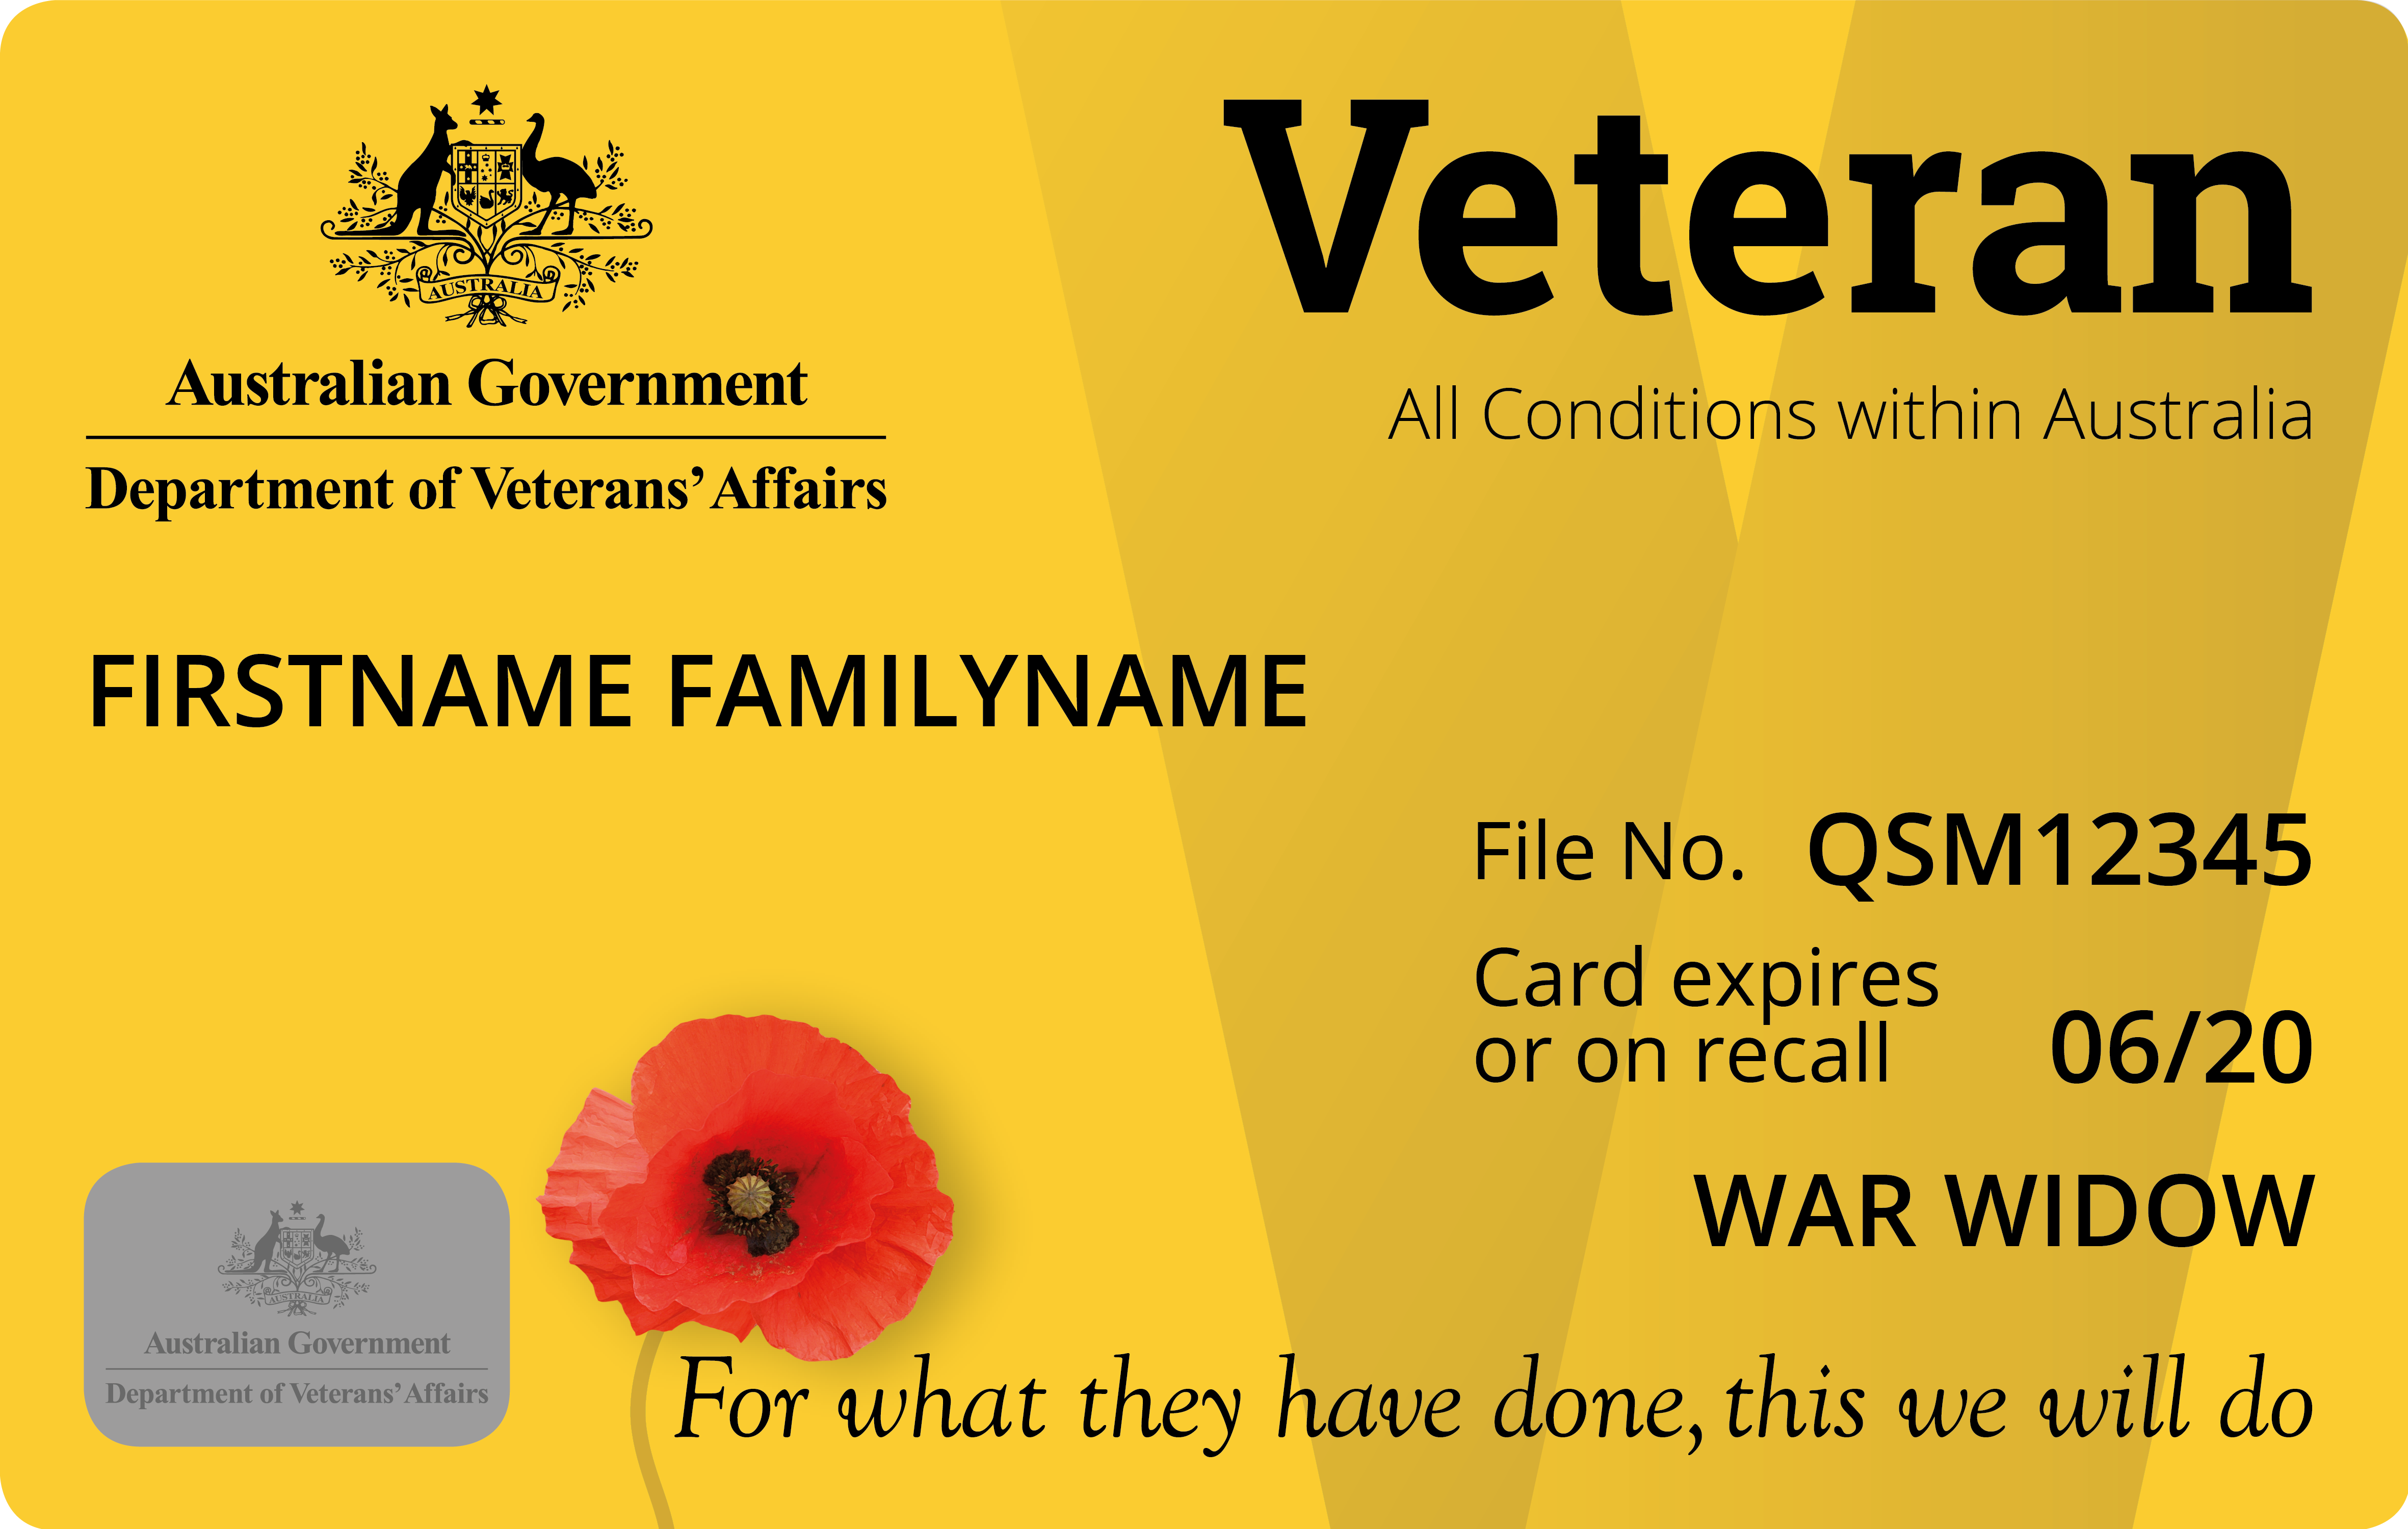 Commonwealth DVA Health Card Endorsed War Widow only. (Also known as Gold Card) Queensland Residents only.